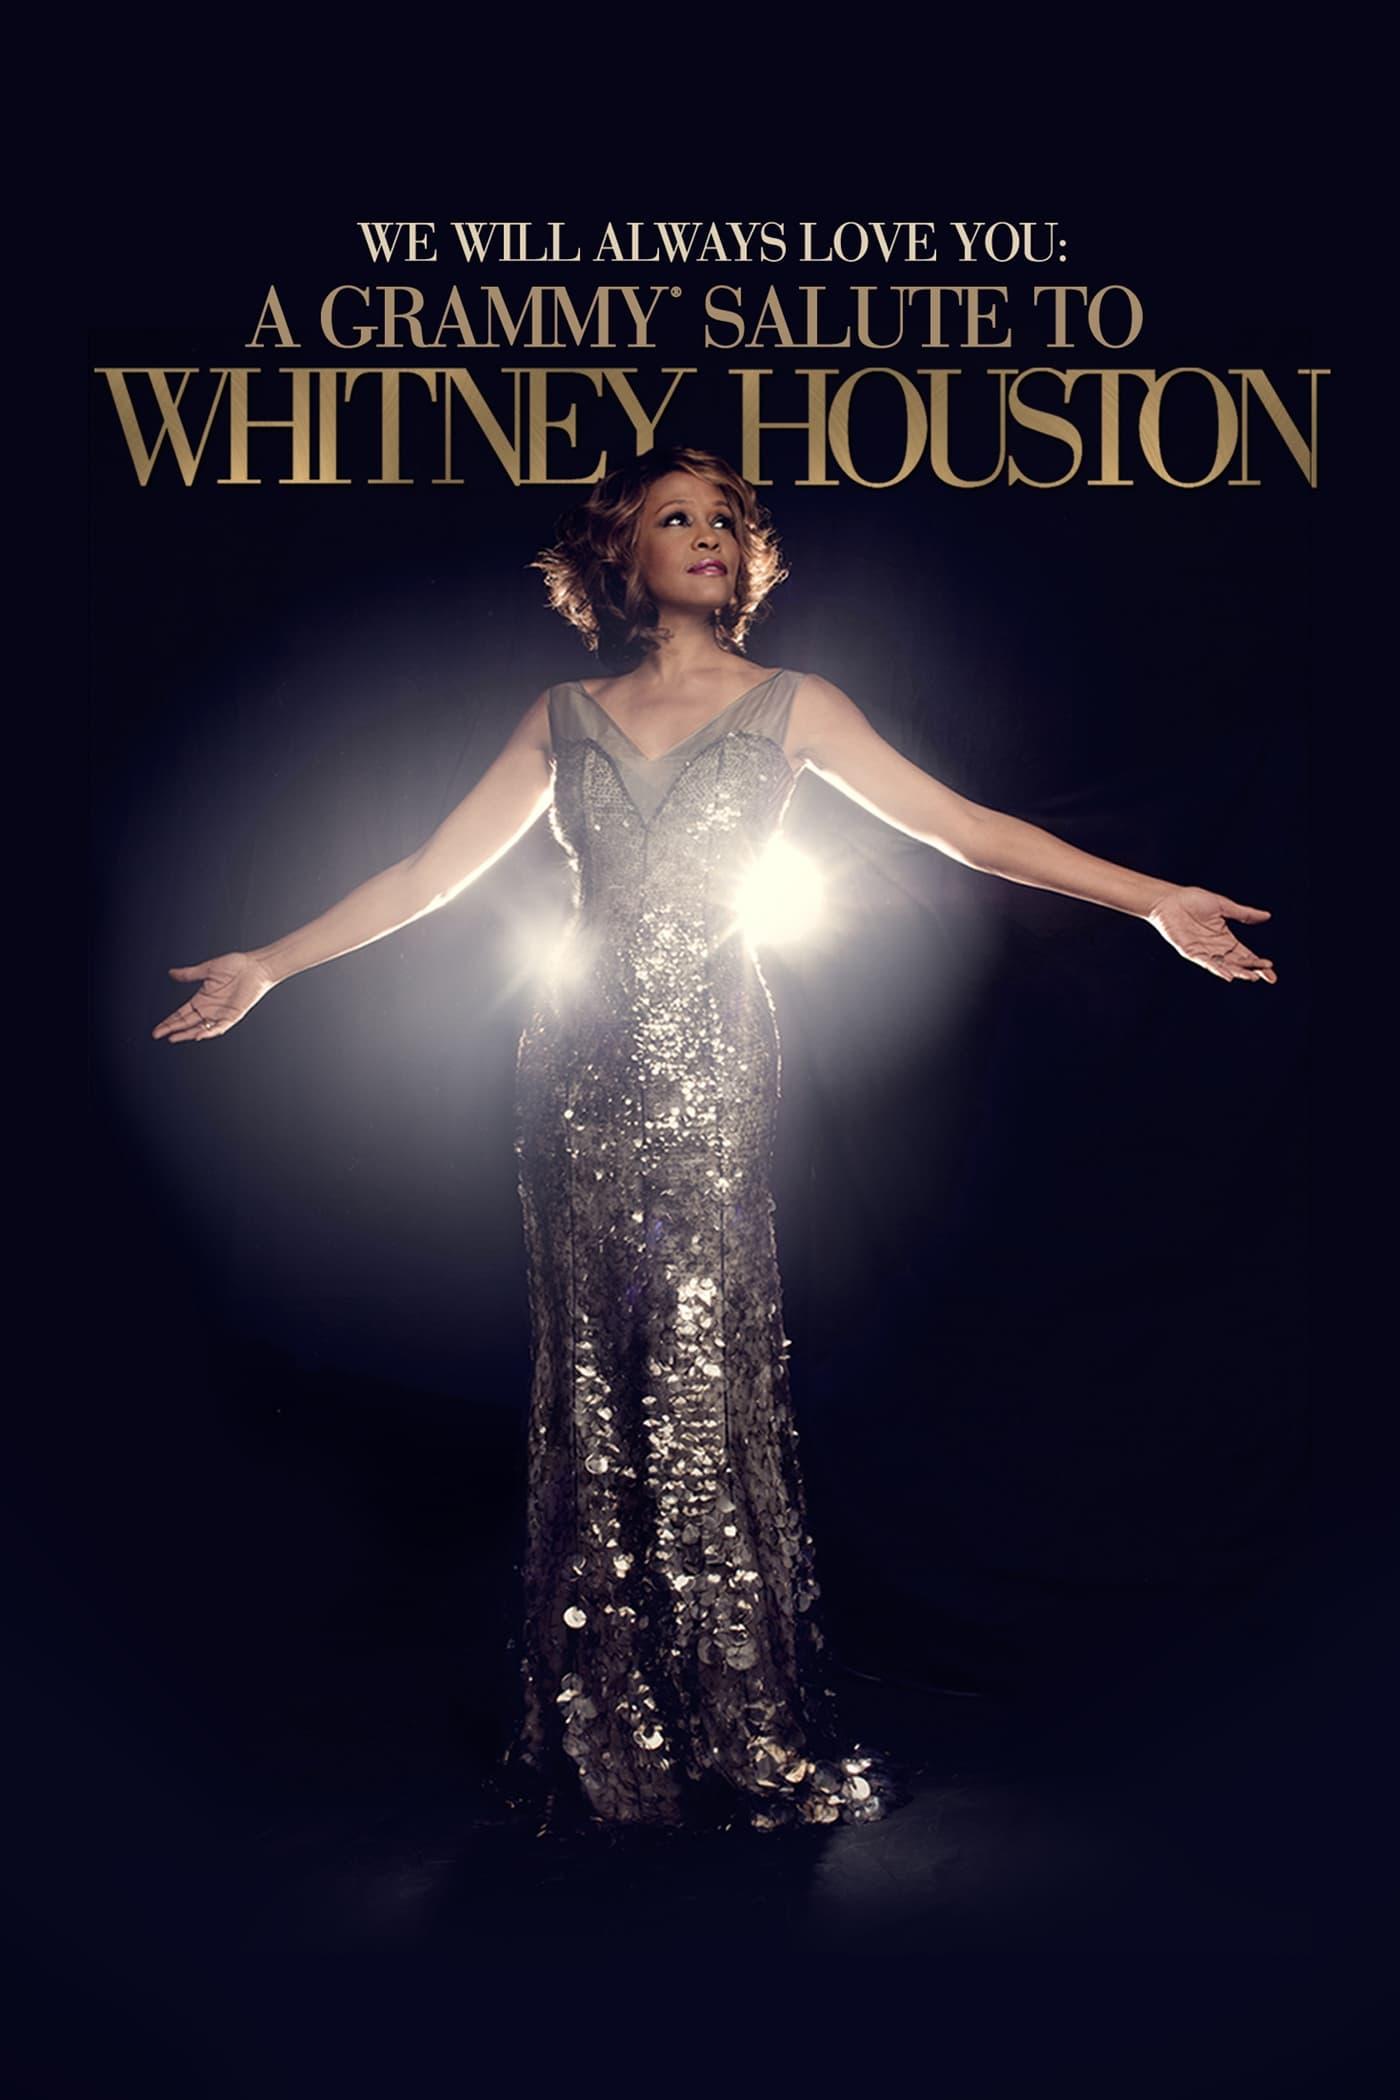 Whitney Houston - We Will Always Love You poster